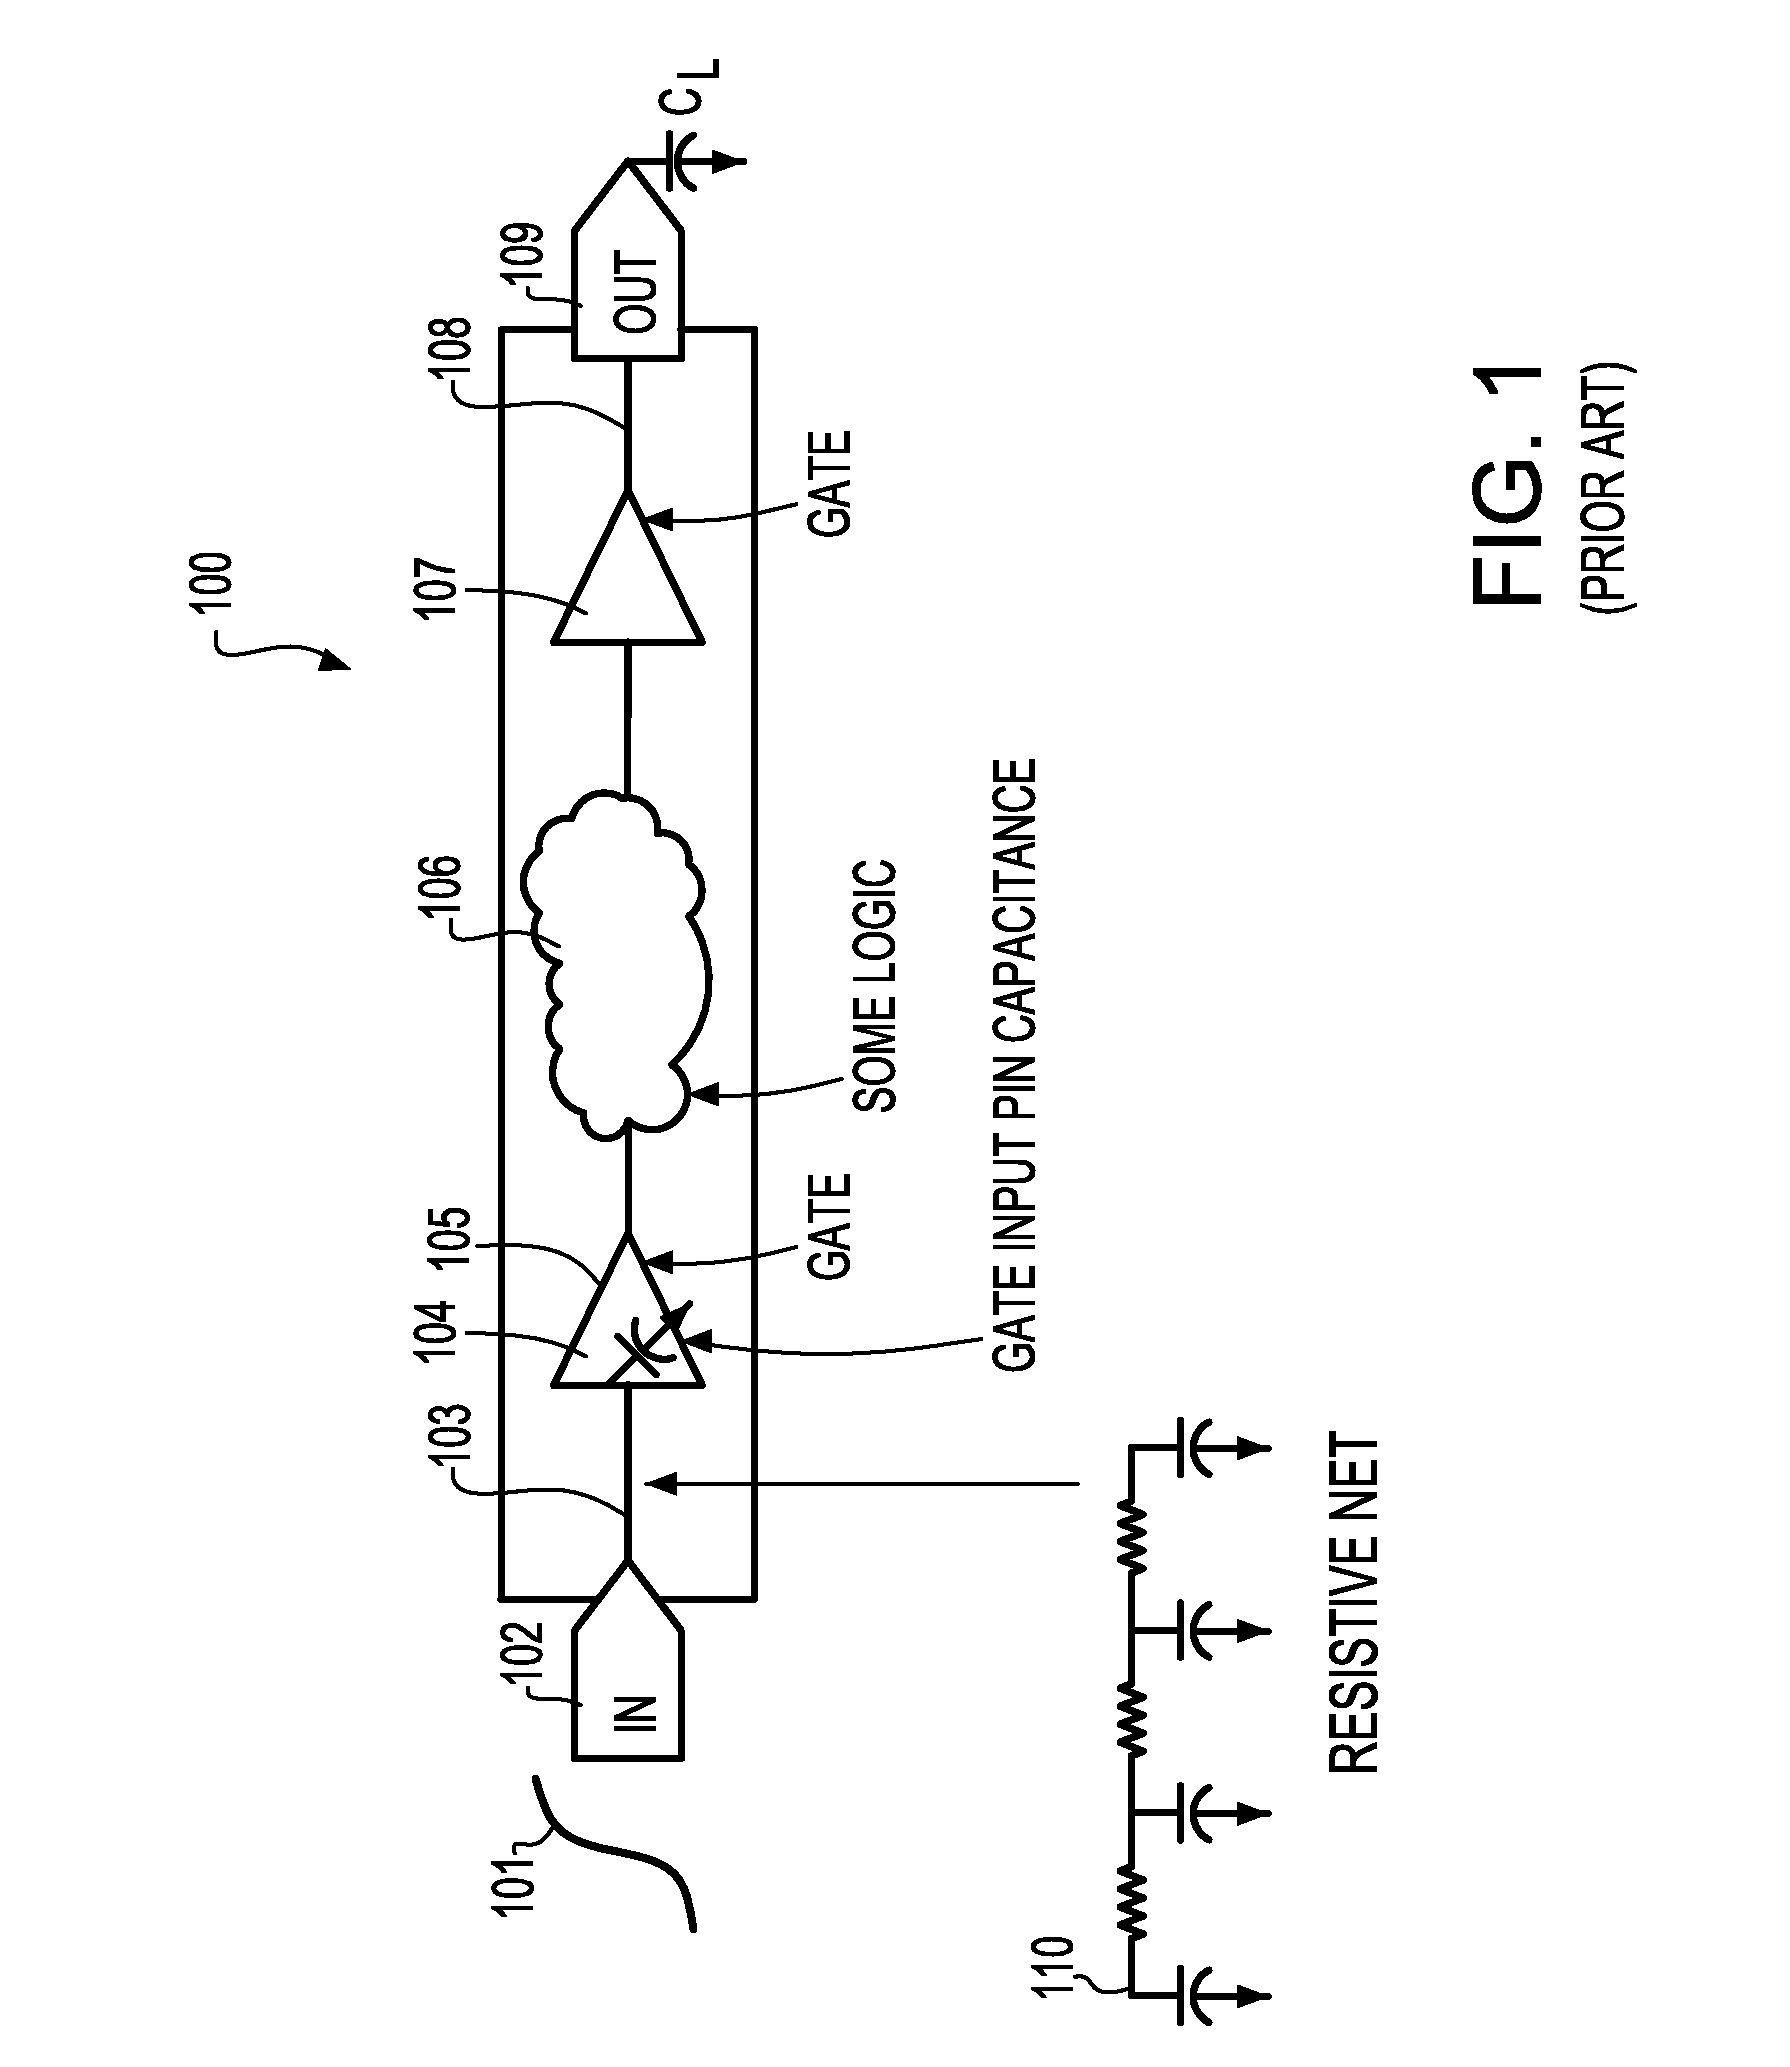 Method of Employing Slew Dependent Pin Capacitances to Capture Interconnect Parasitics During Timing Abstraction of VLSI Circuits